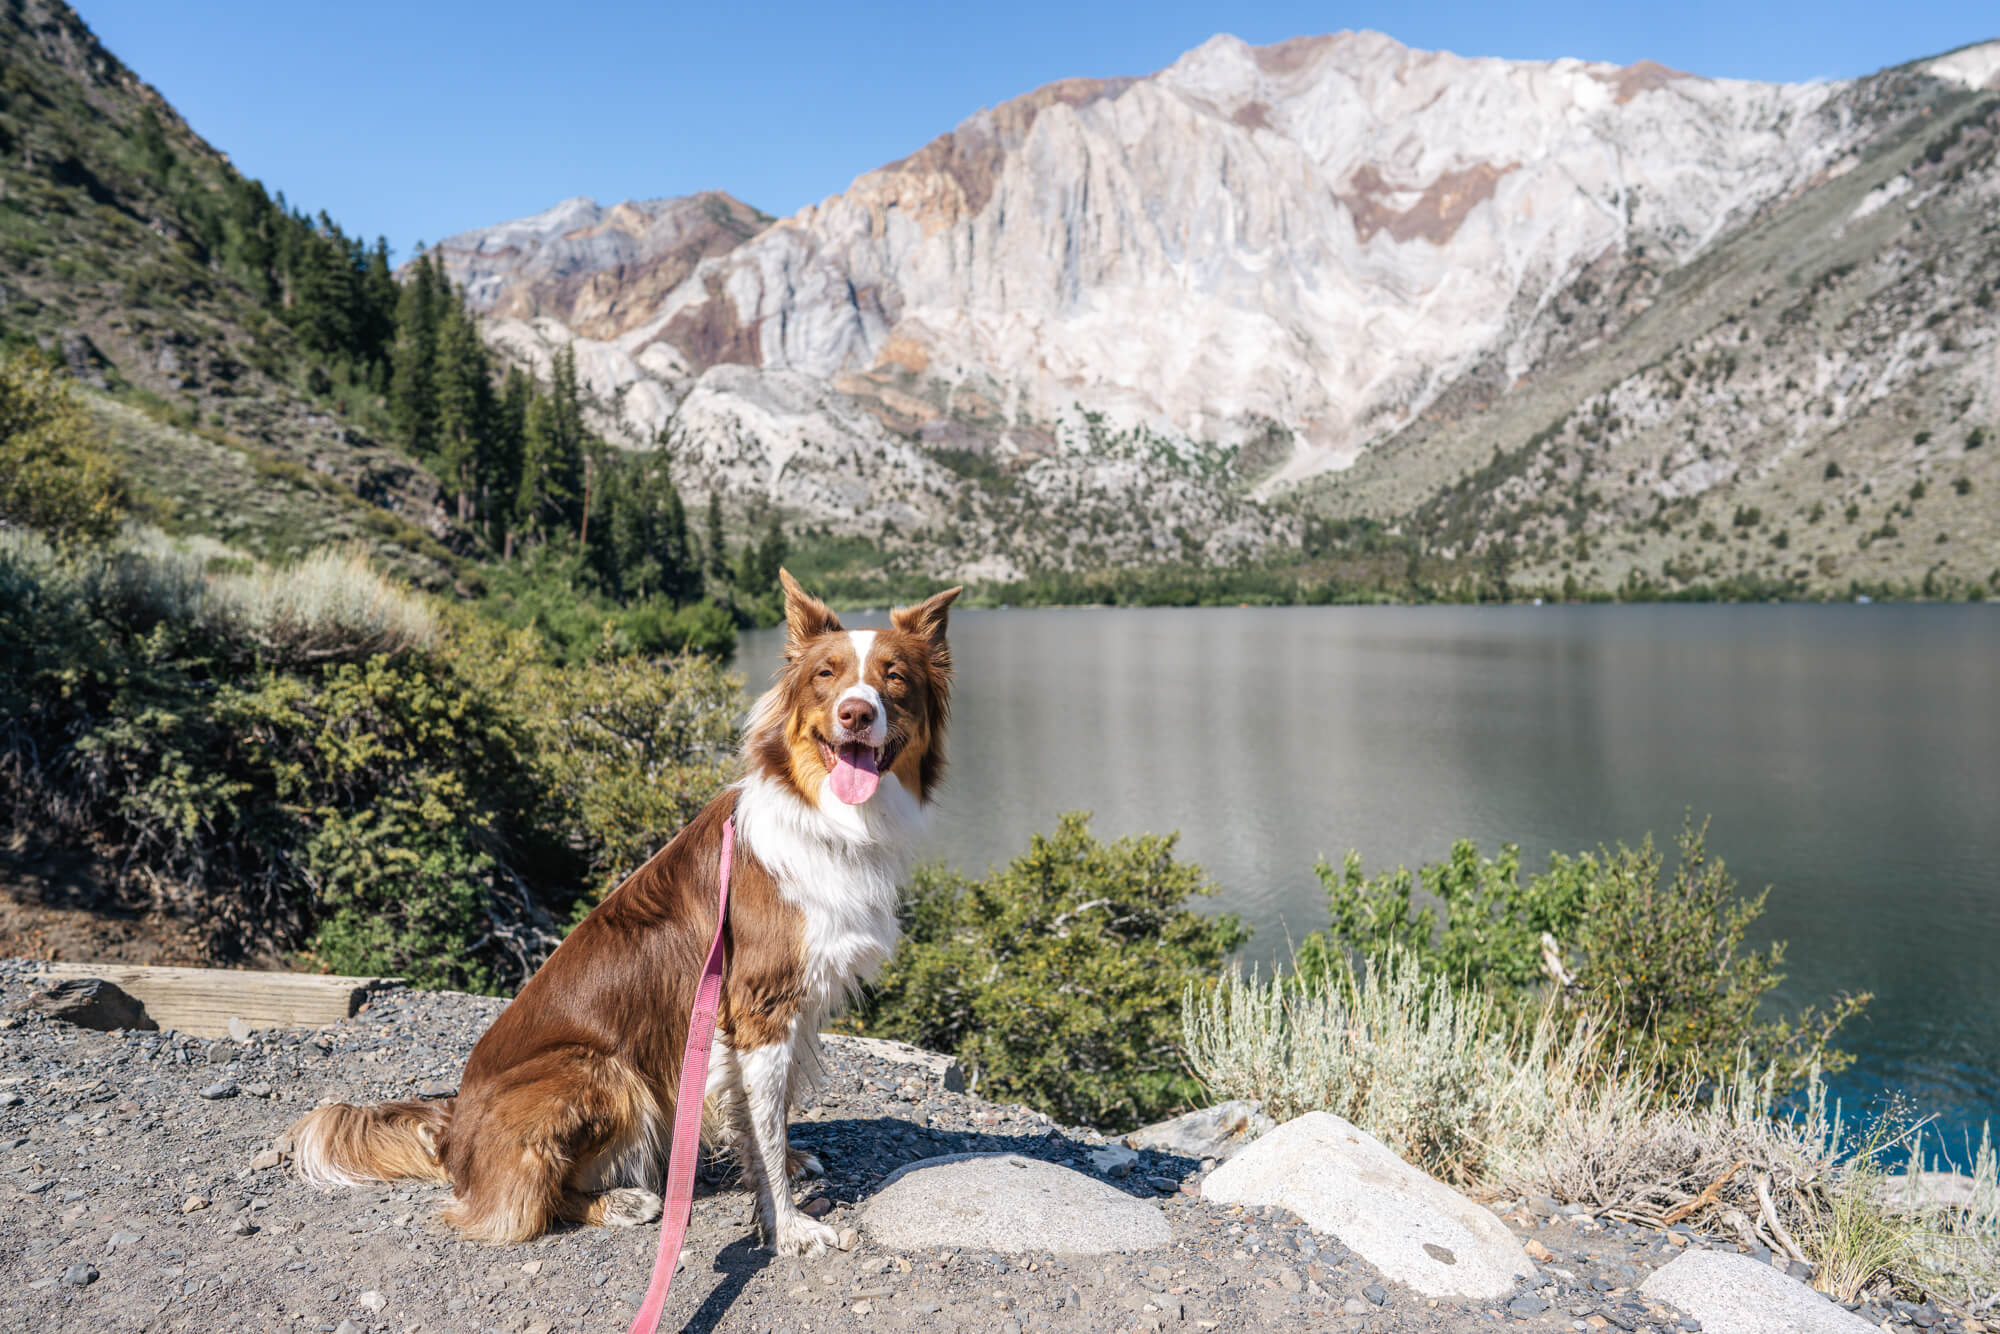 Our dog River sits next to Convict Lake with Laurel Mountain in the background